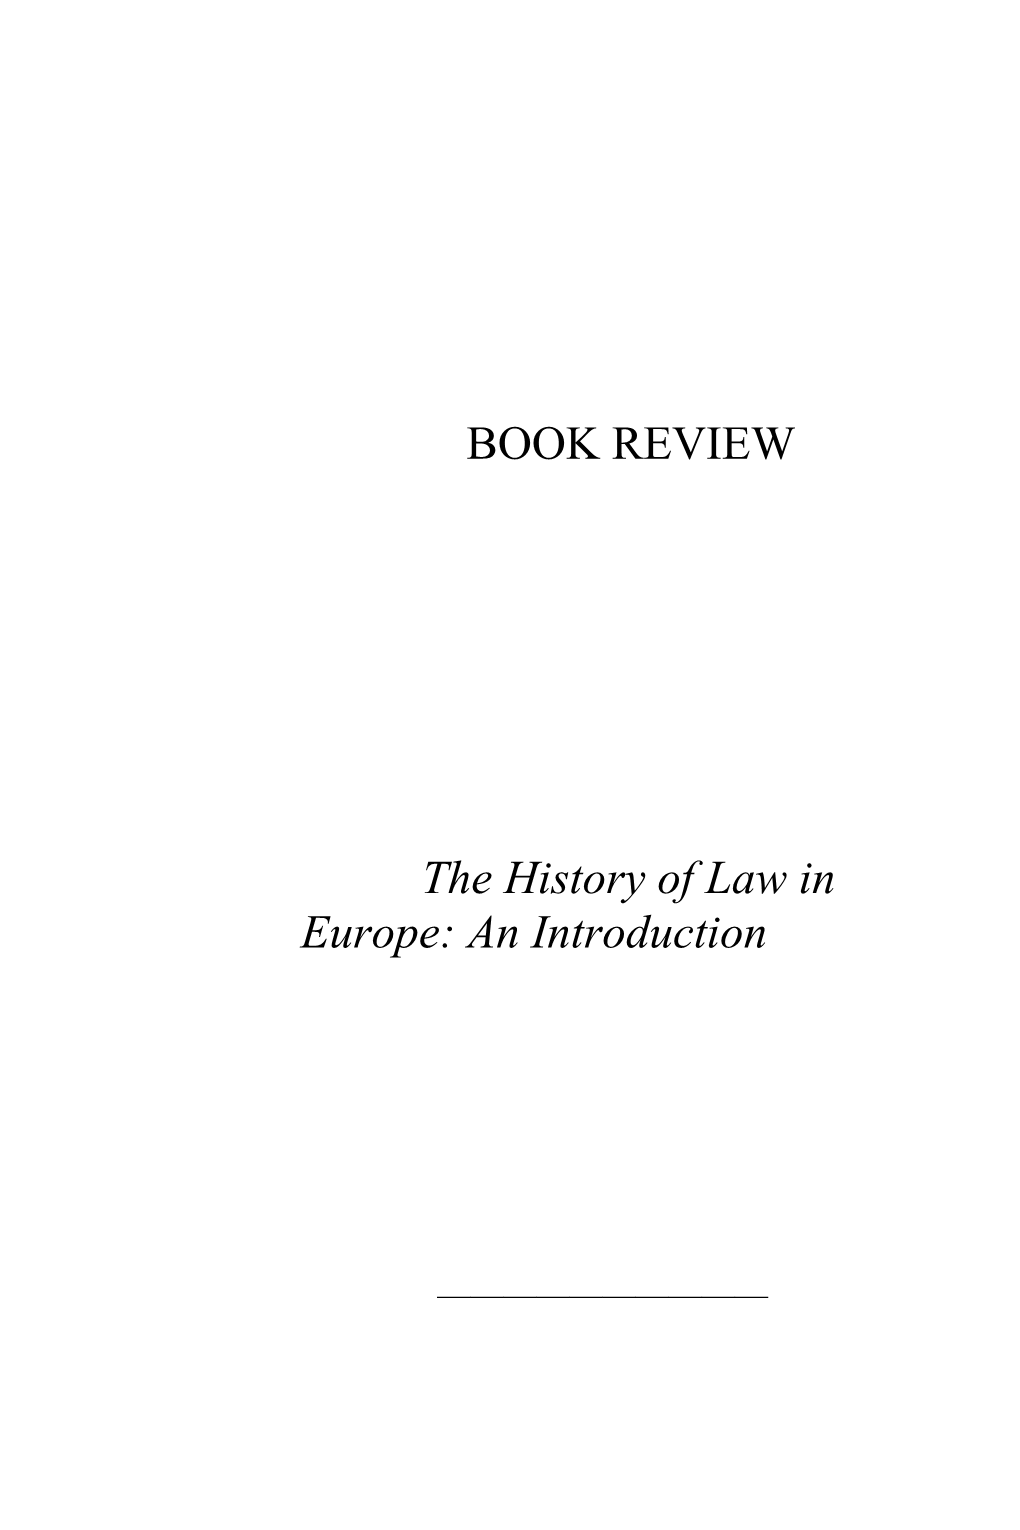 BOOK REVIEW the History of Law in Europe: an Introduction